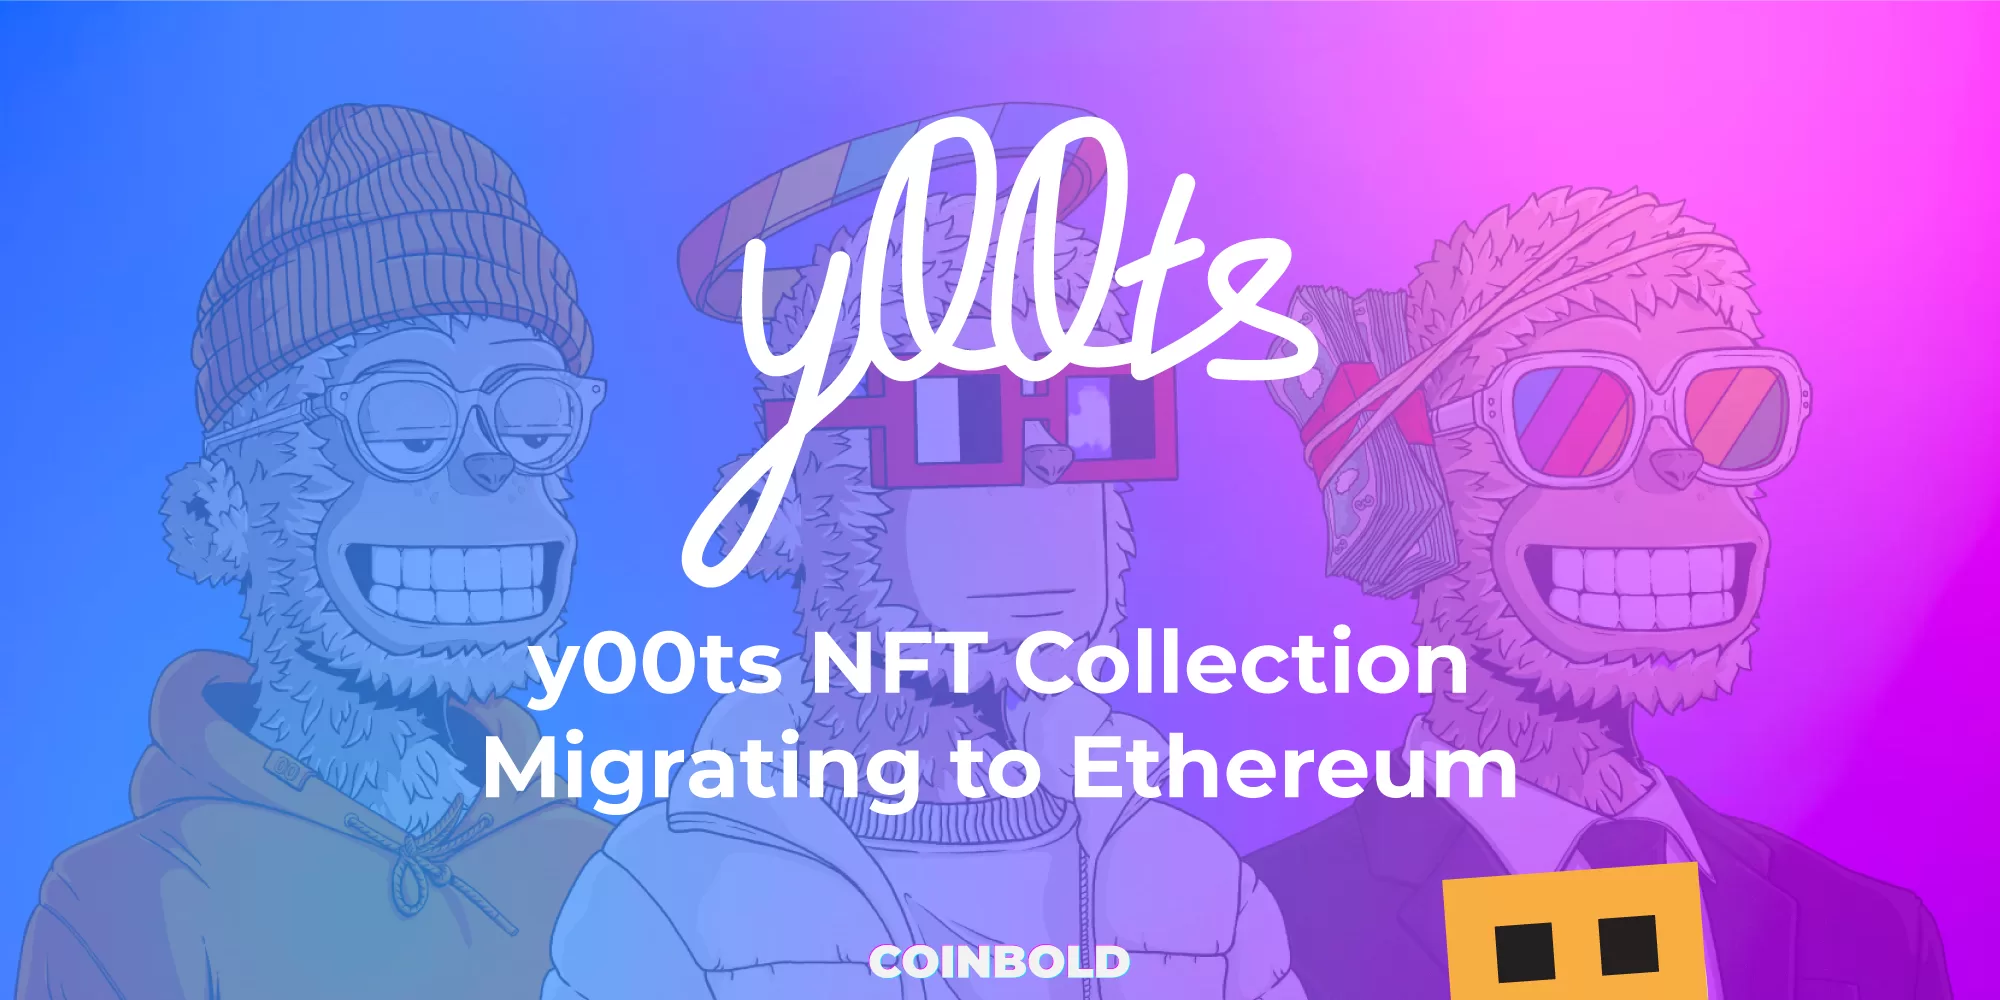 y00ts NFT Collection migrating to Ethereum